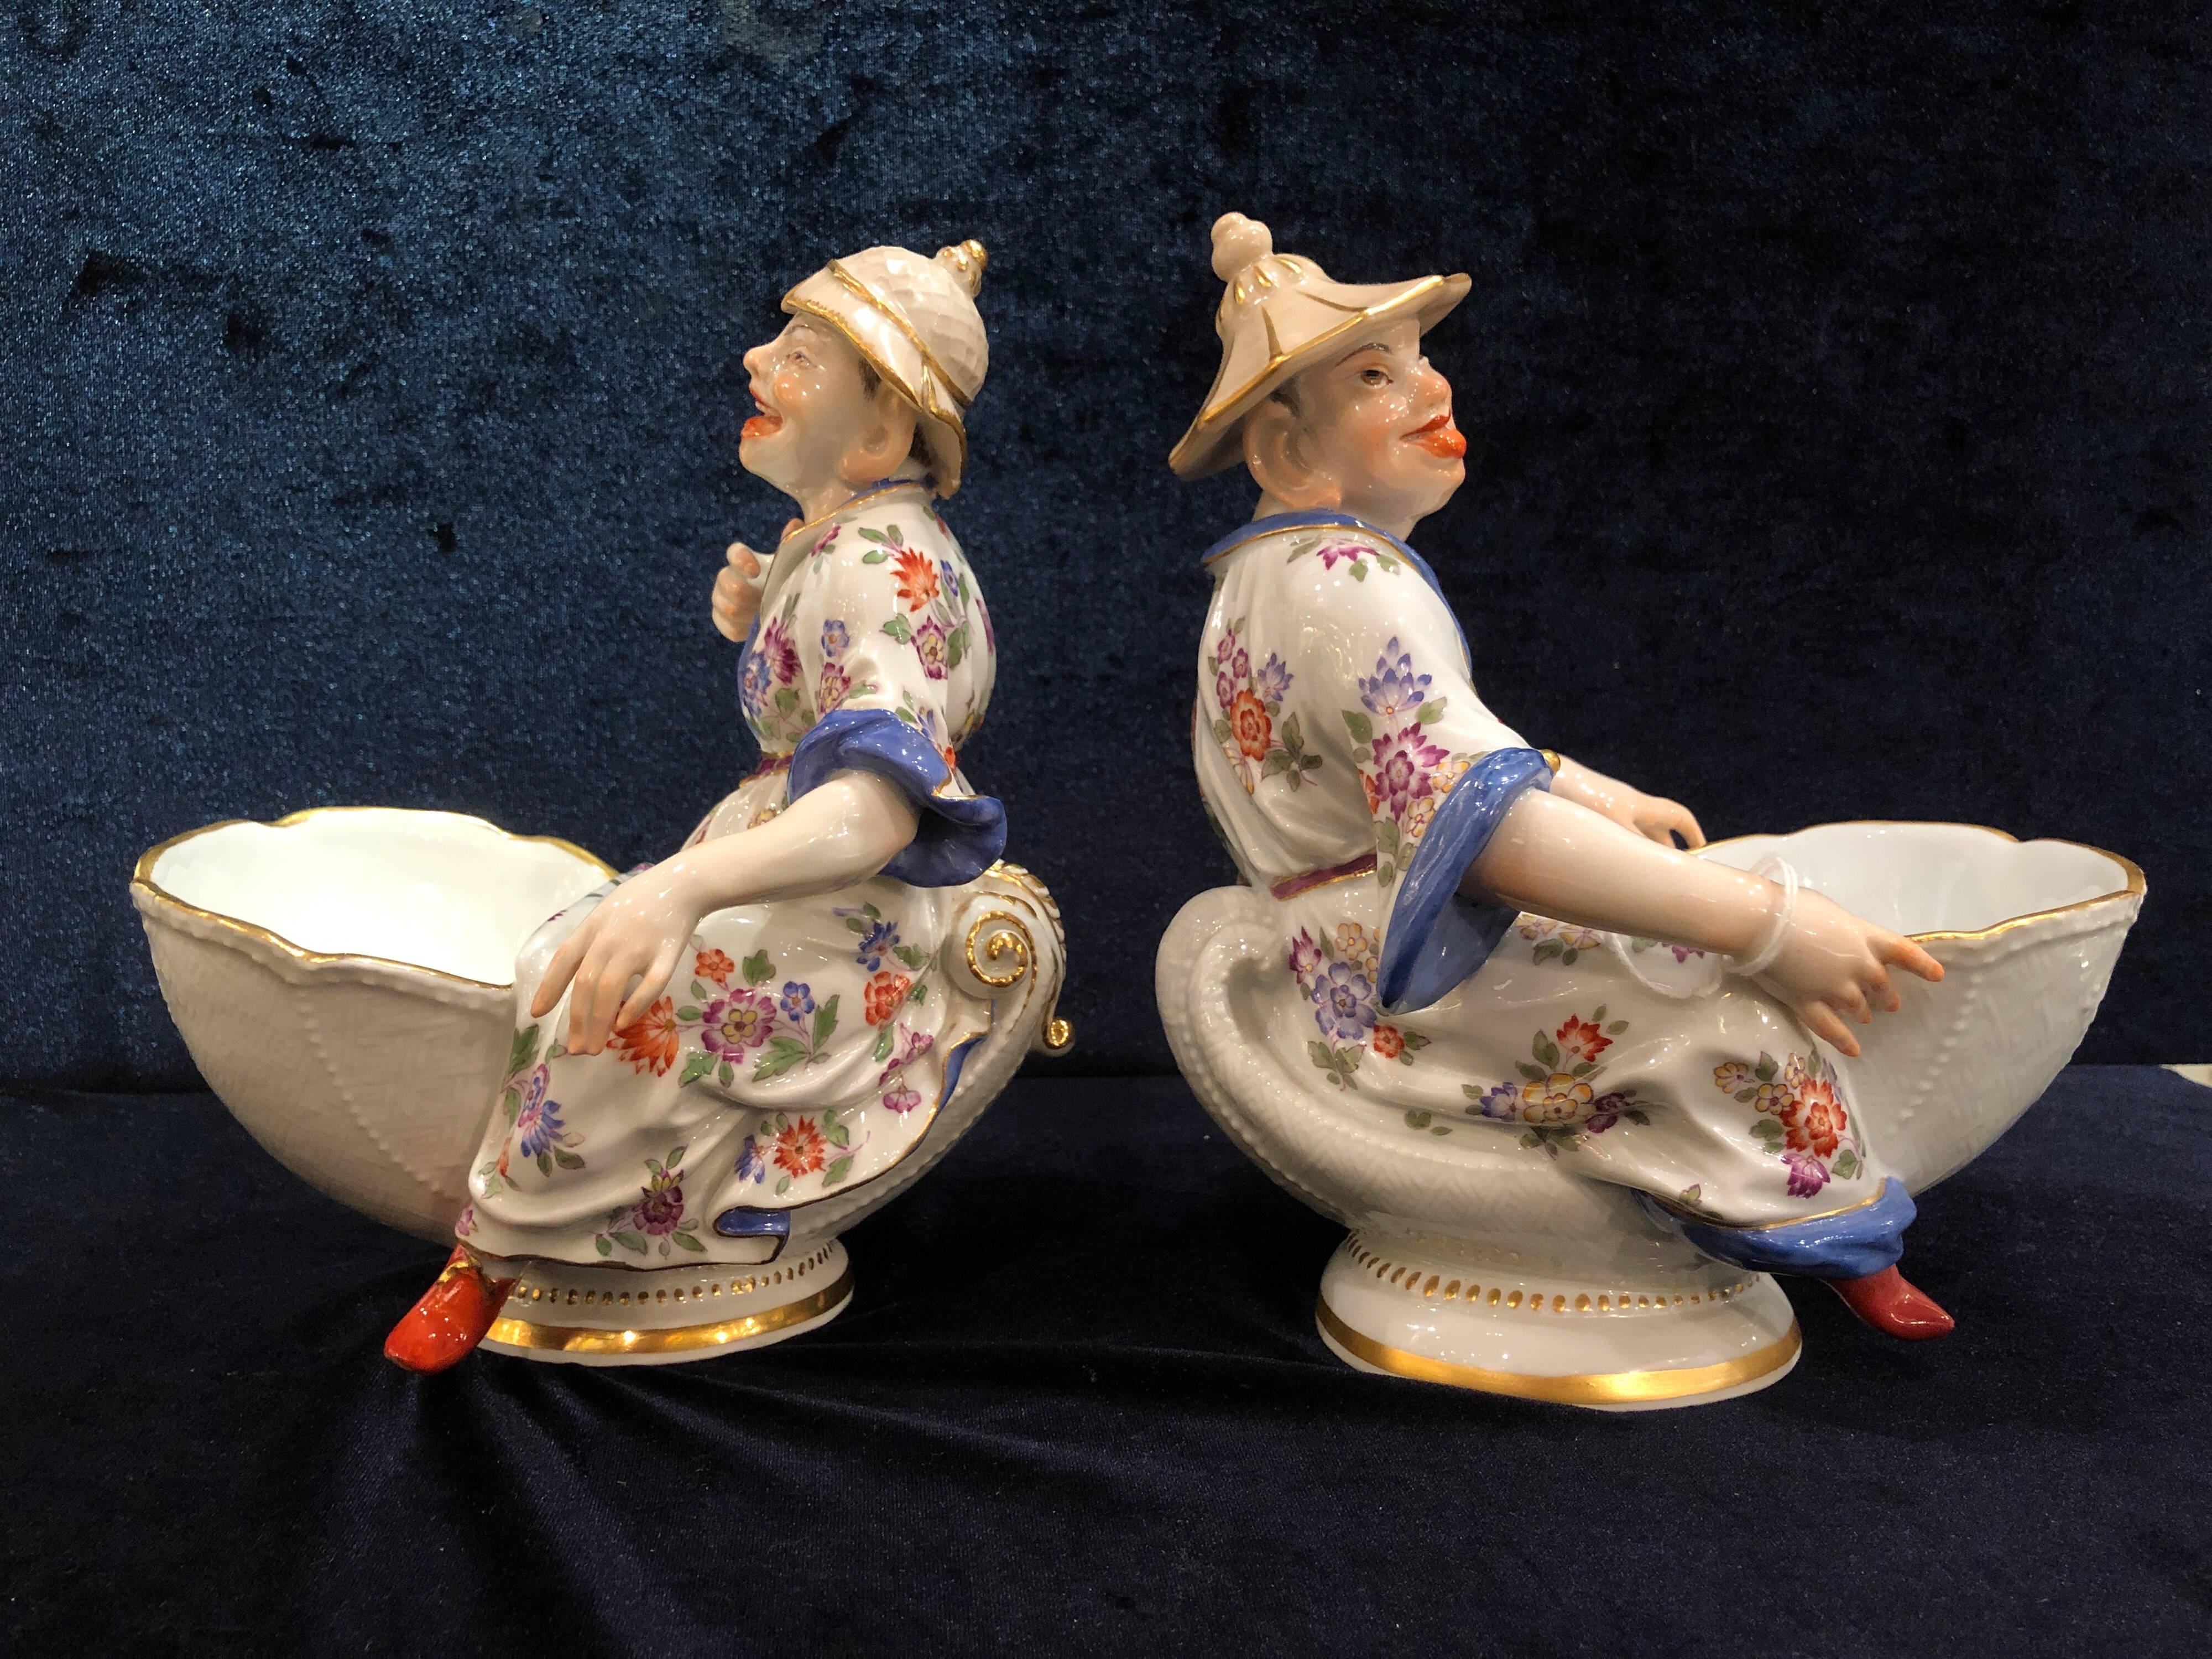 A fine pair of Meissen porcelain chinoiserie figural sweetmeat dishes, after a model by J.J. Kandler
Each with a Malabar chinoiserie figure seated on a sea-shell and holding a bowl in front of him, basketweave incised decoration on the sea-shells,